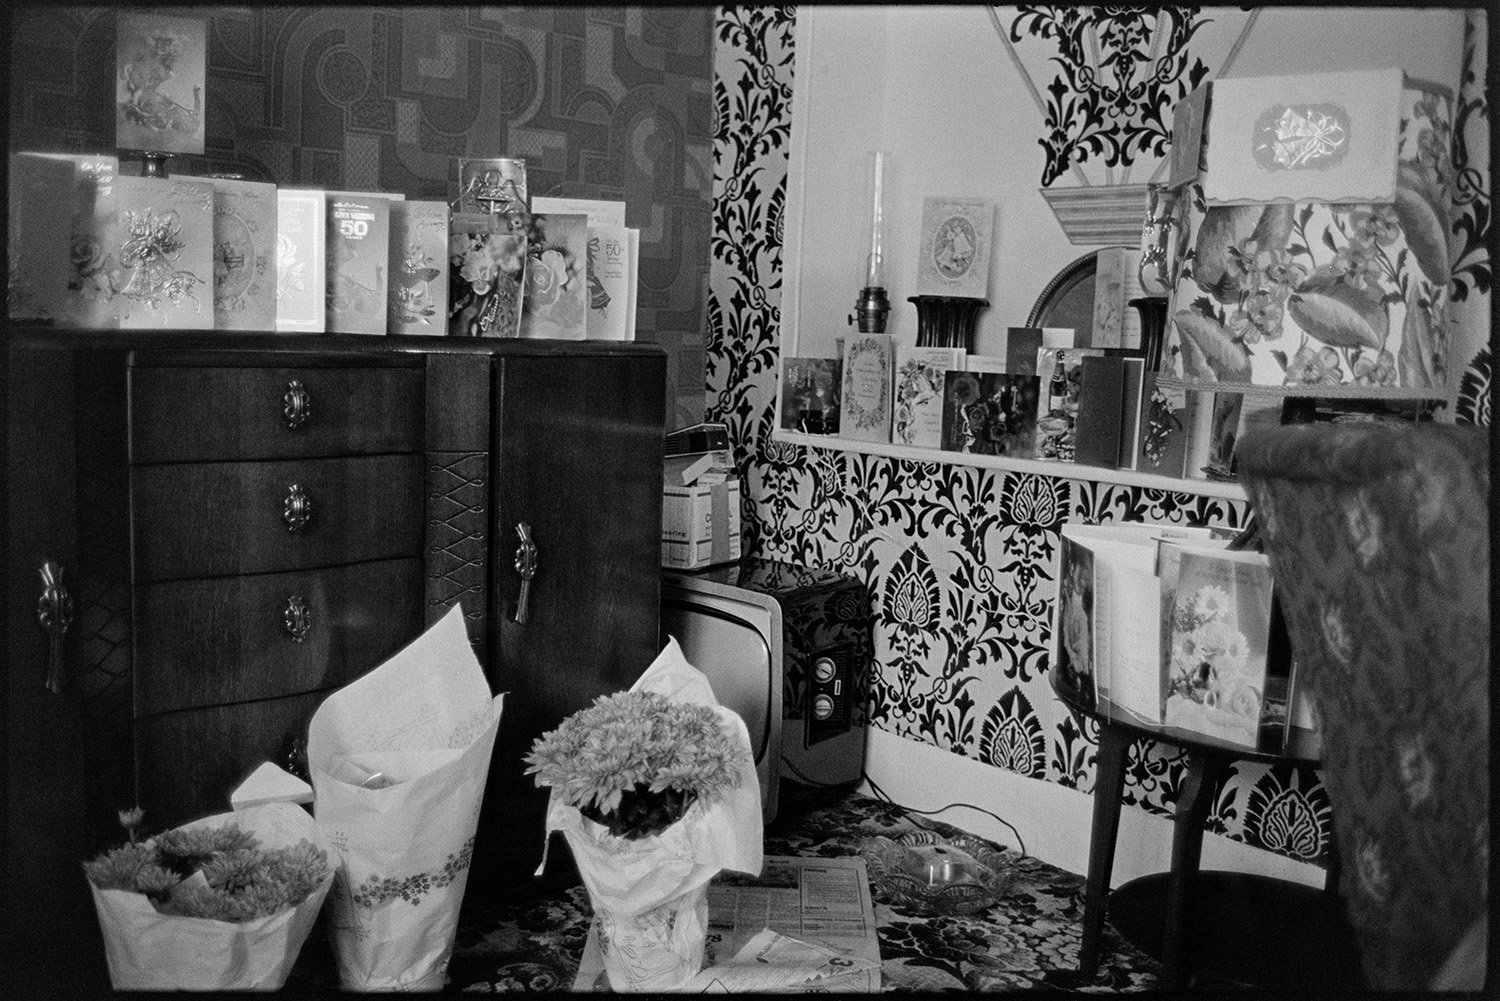 Golden Wedding Anniversary presents, cake and flowers. 
[Cards and flowers given to Mr and Mrs Hutchins for their Golden Wedding anniversary, displayed in their home at Fore Street, Dolton. The walls are covered with patterned wallpaper.]